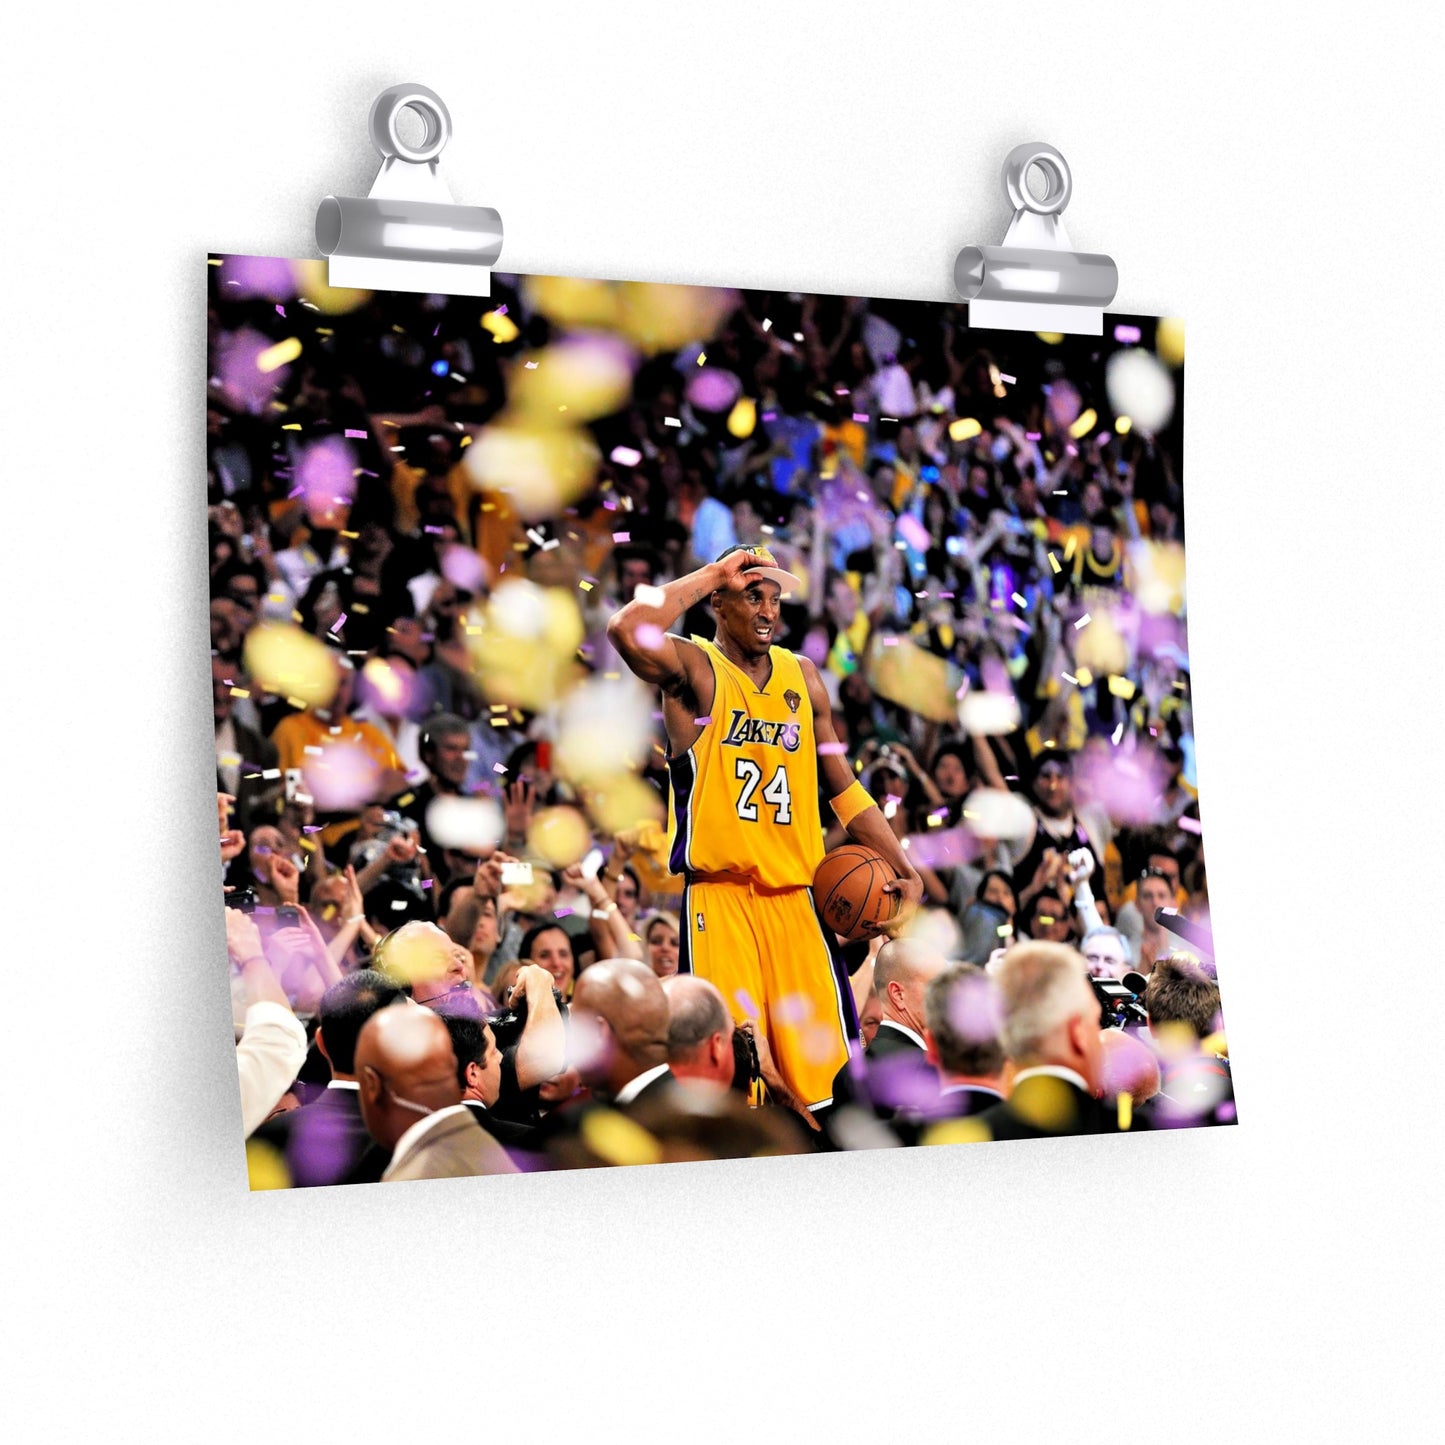 Kobe Bryant Celebrates Finals Win With Confetti In Crowd In Yellow Los Angeles Lakers 24 Jersey Poster